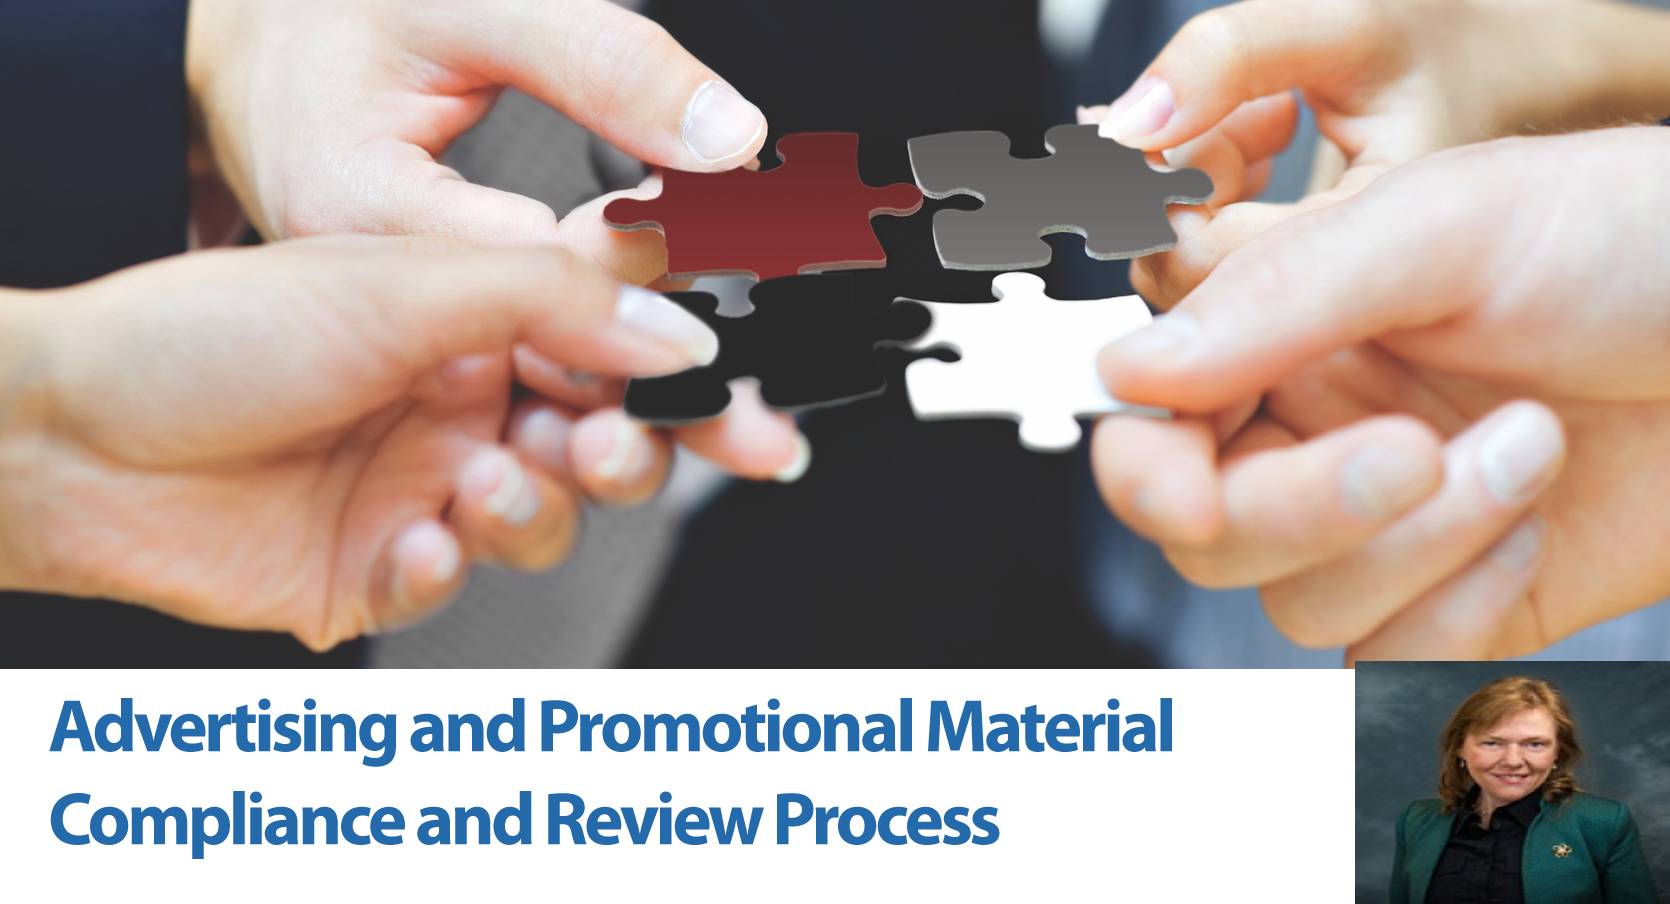 Advertising and Promotional Material Compliance and Review Process, Denver, Colorado, United States